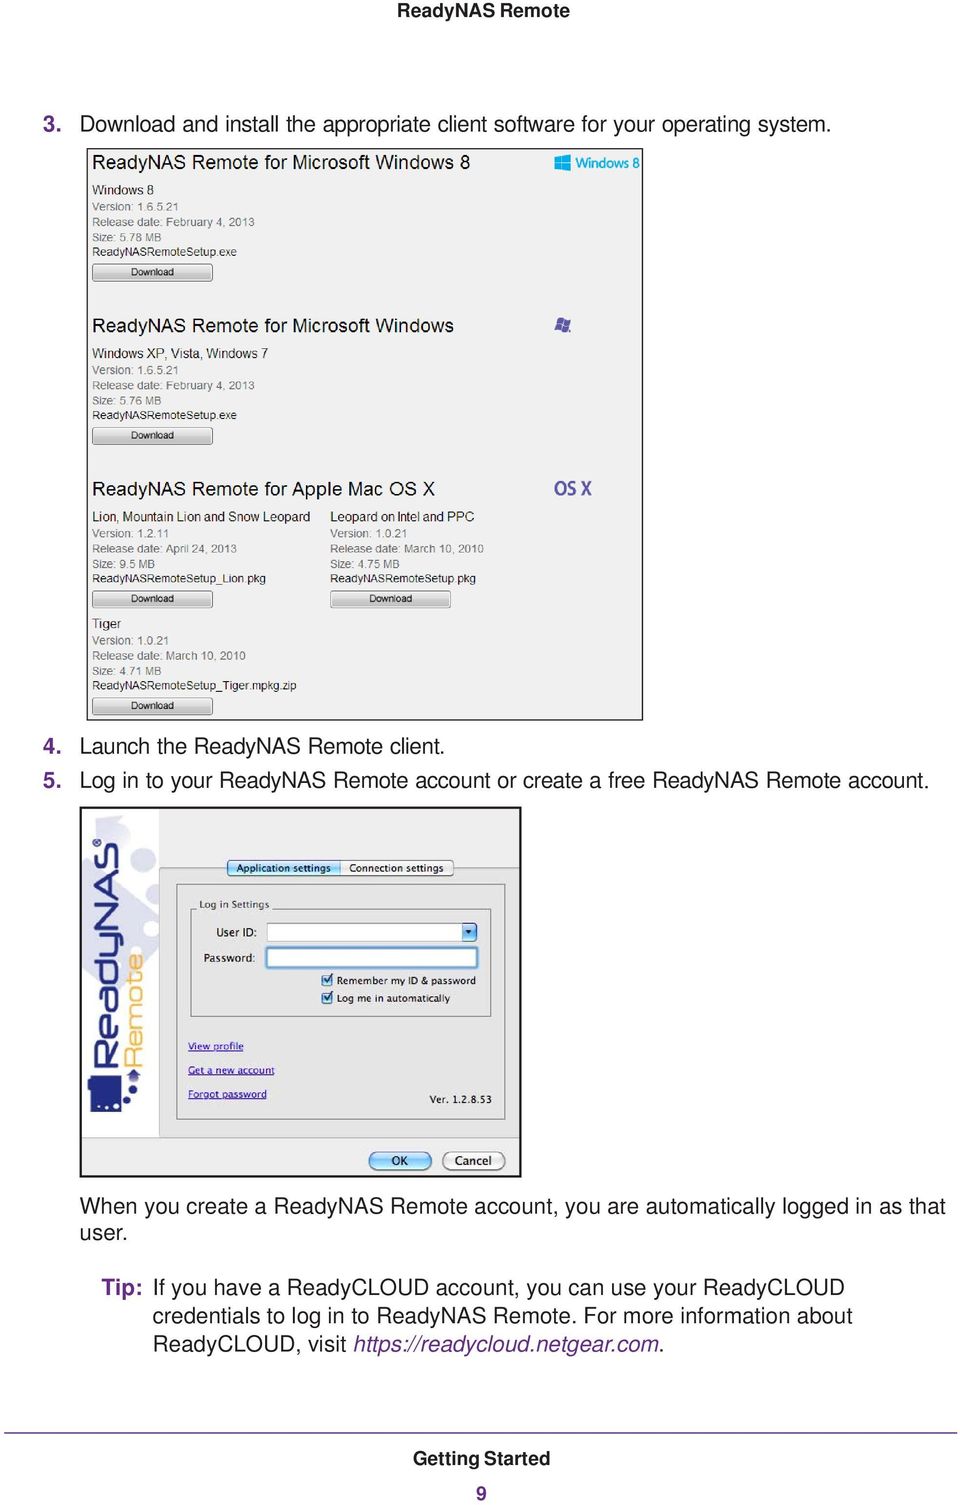 When you create a ReadyNAS Remote account, you are automatically logged in as that user.